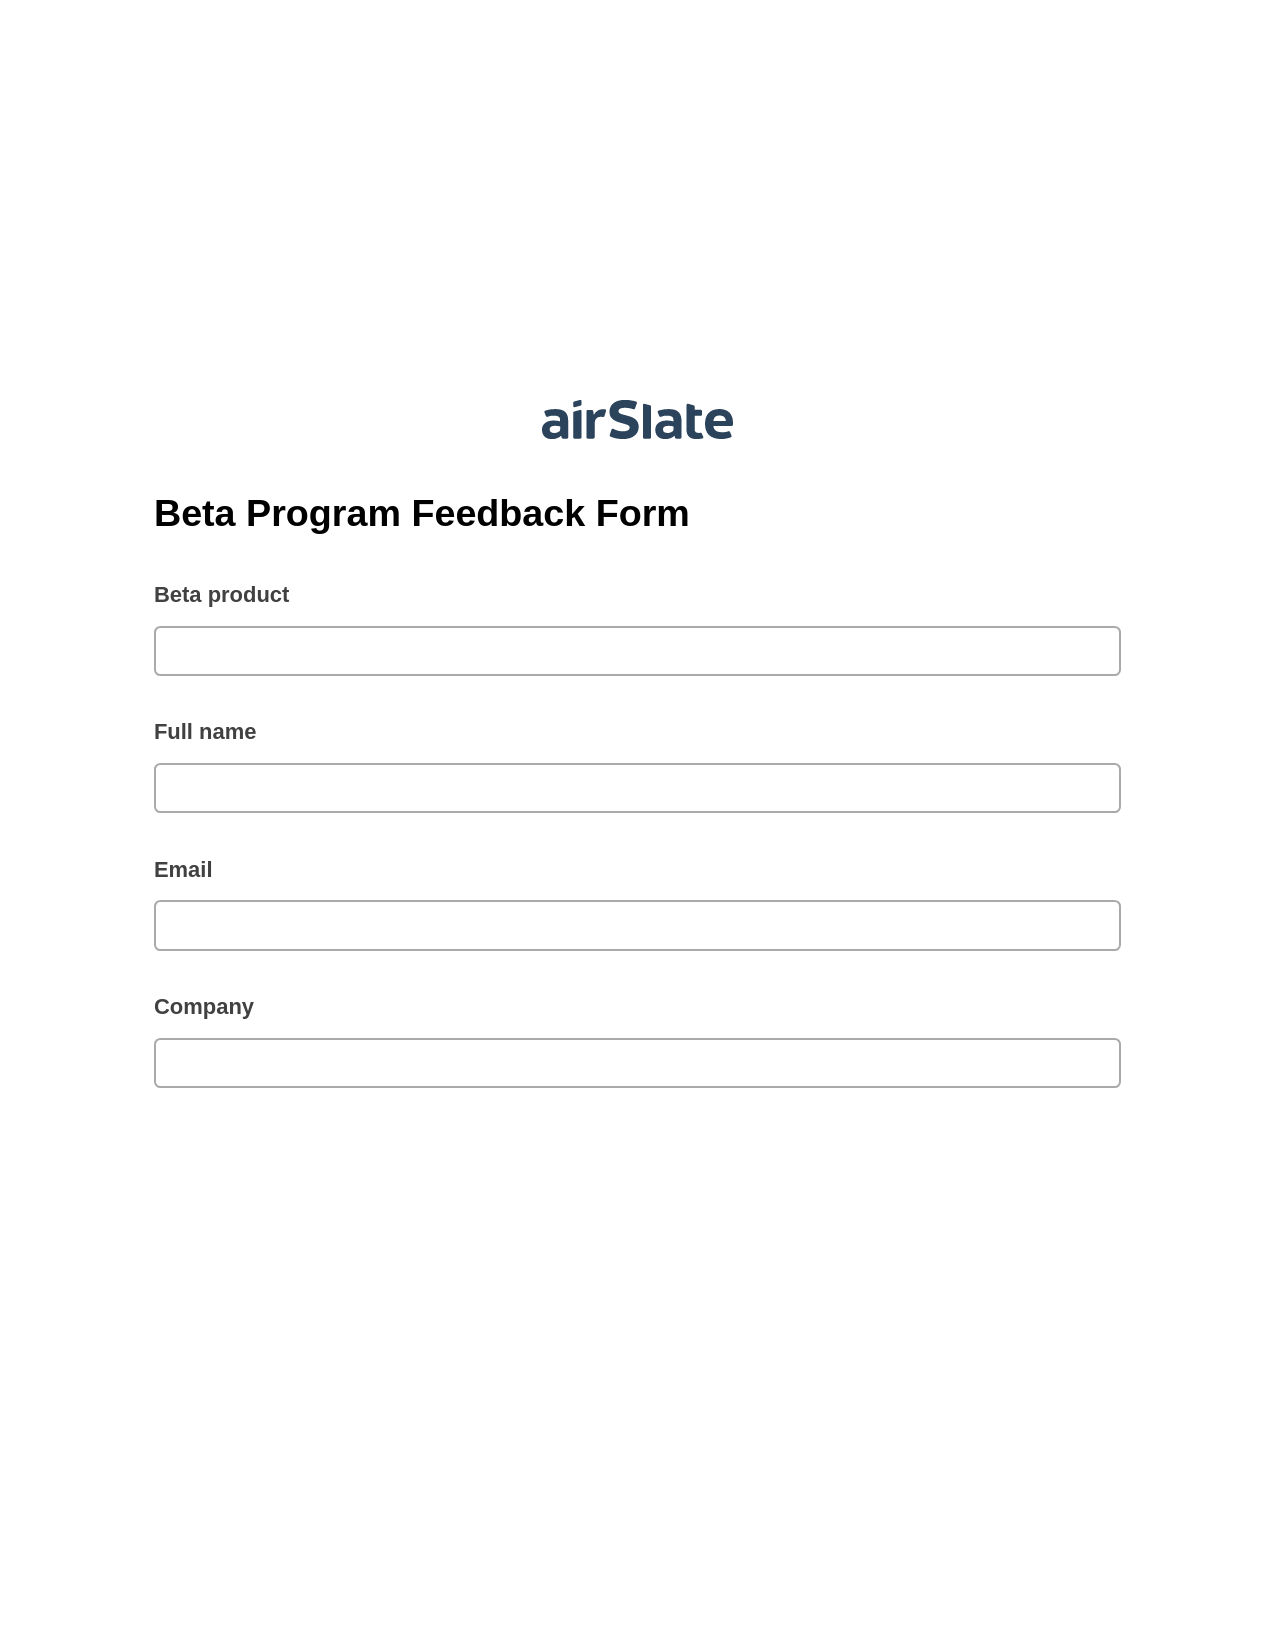 Multirole Beta Program Feedback Form Pre-fill Dropdown from Airtable, Add Tags to Slate Bot, Google Drive Bot